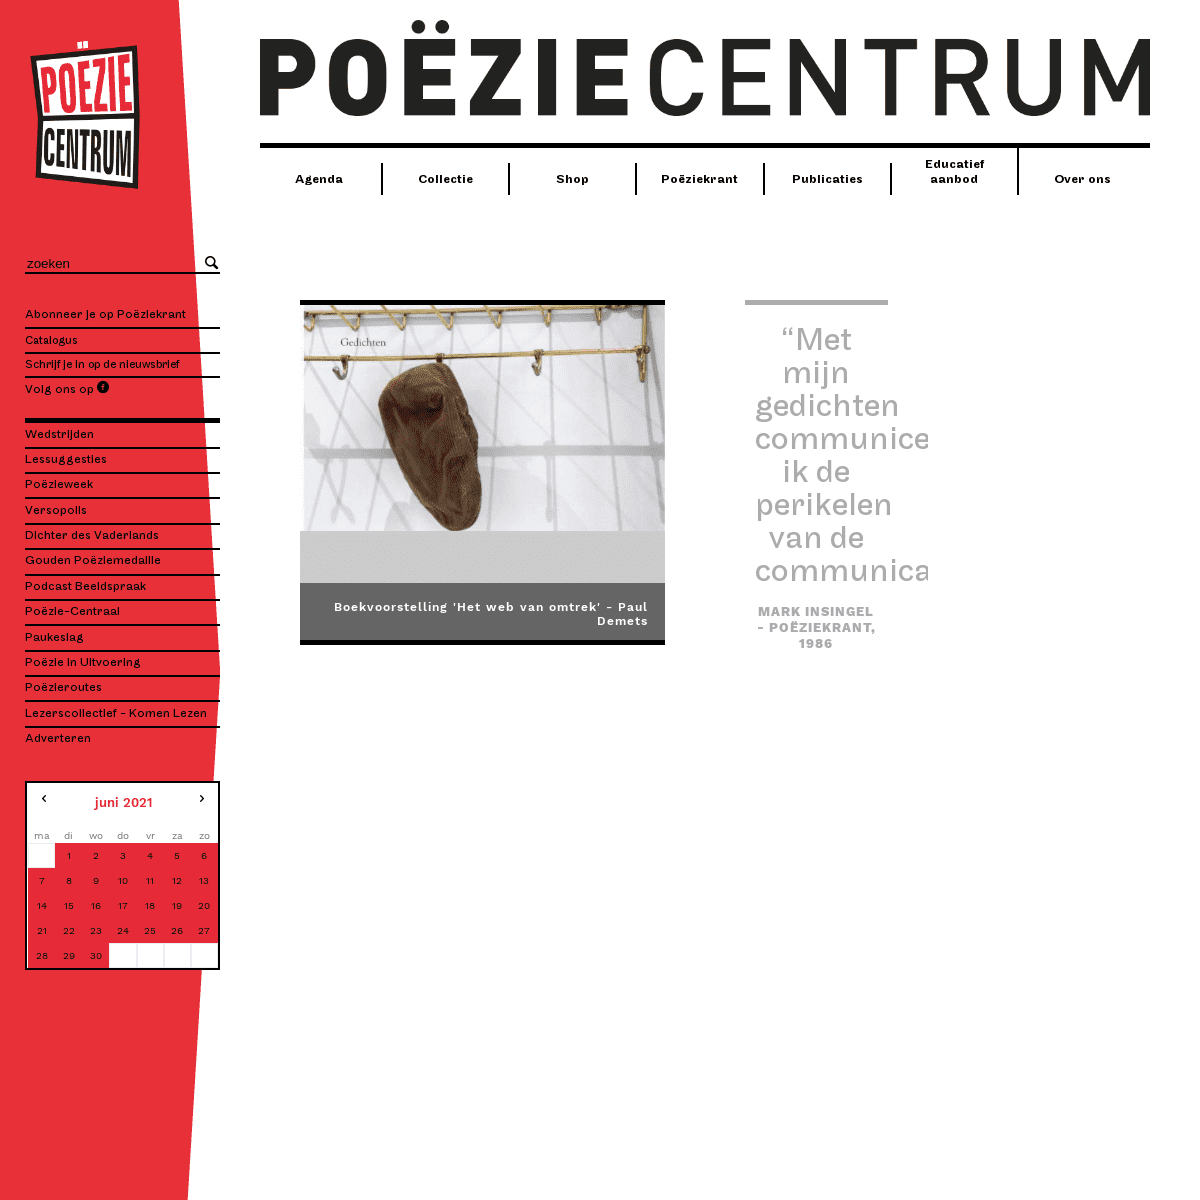 A complete backup of https://poeziecentrum.be